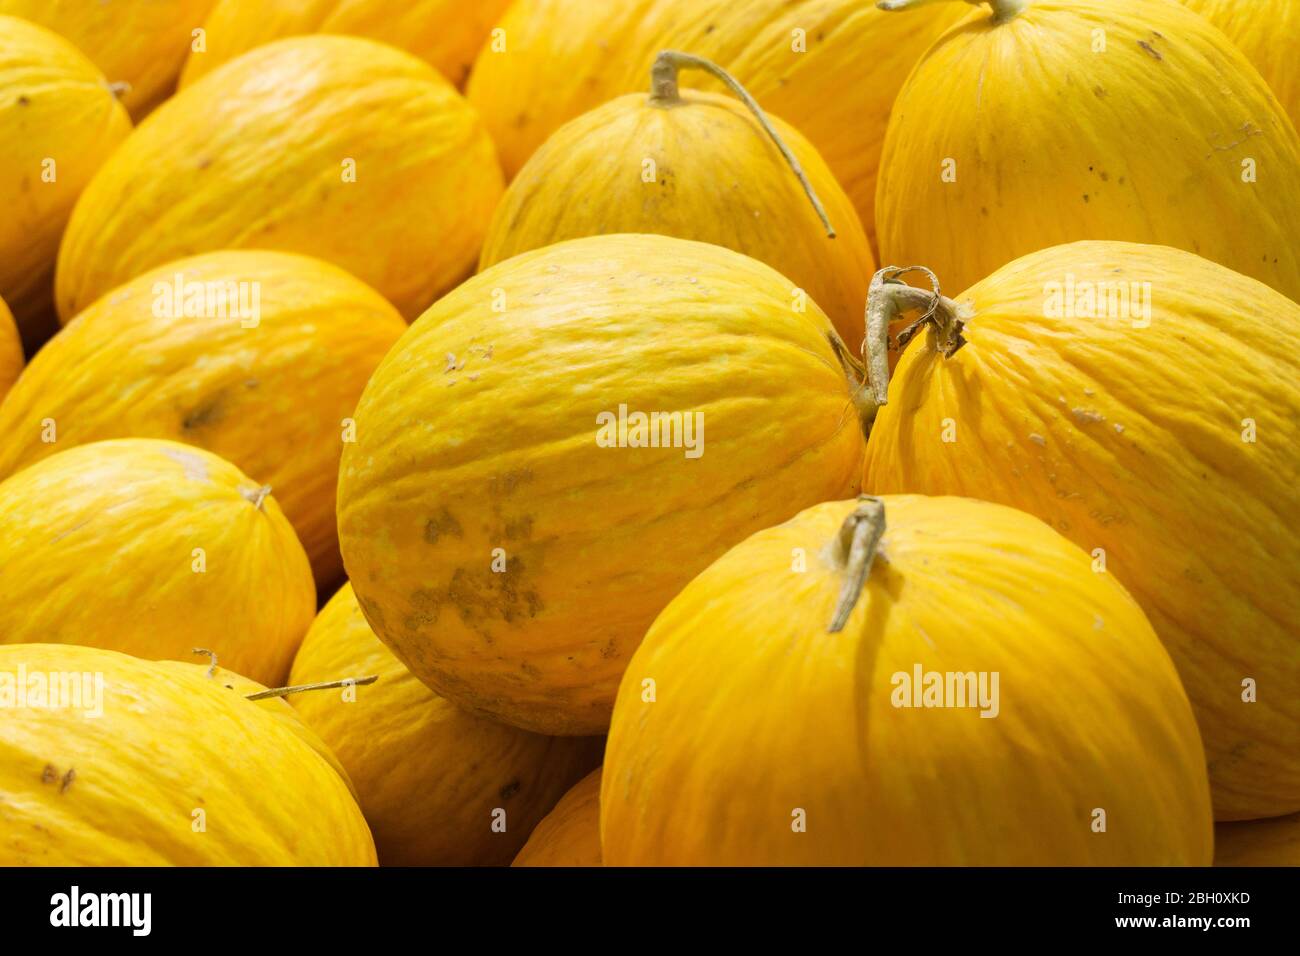 Collection of fresh yellow melons Stock Photo